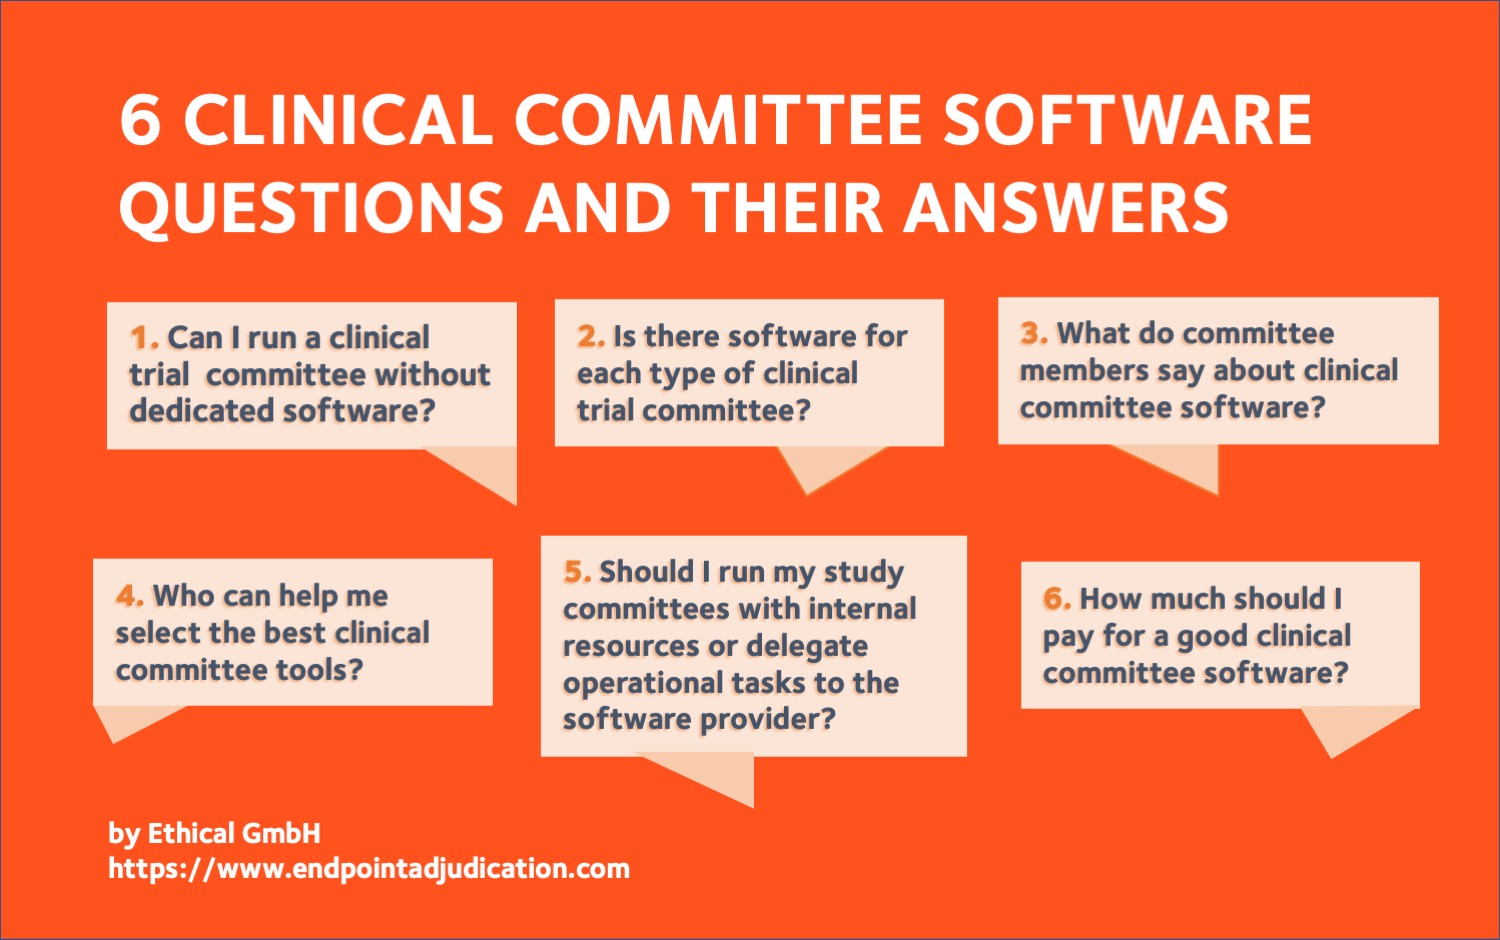 6 clinical committee software questions